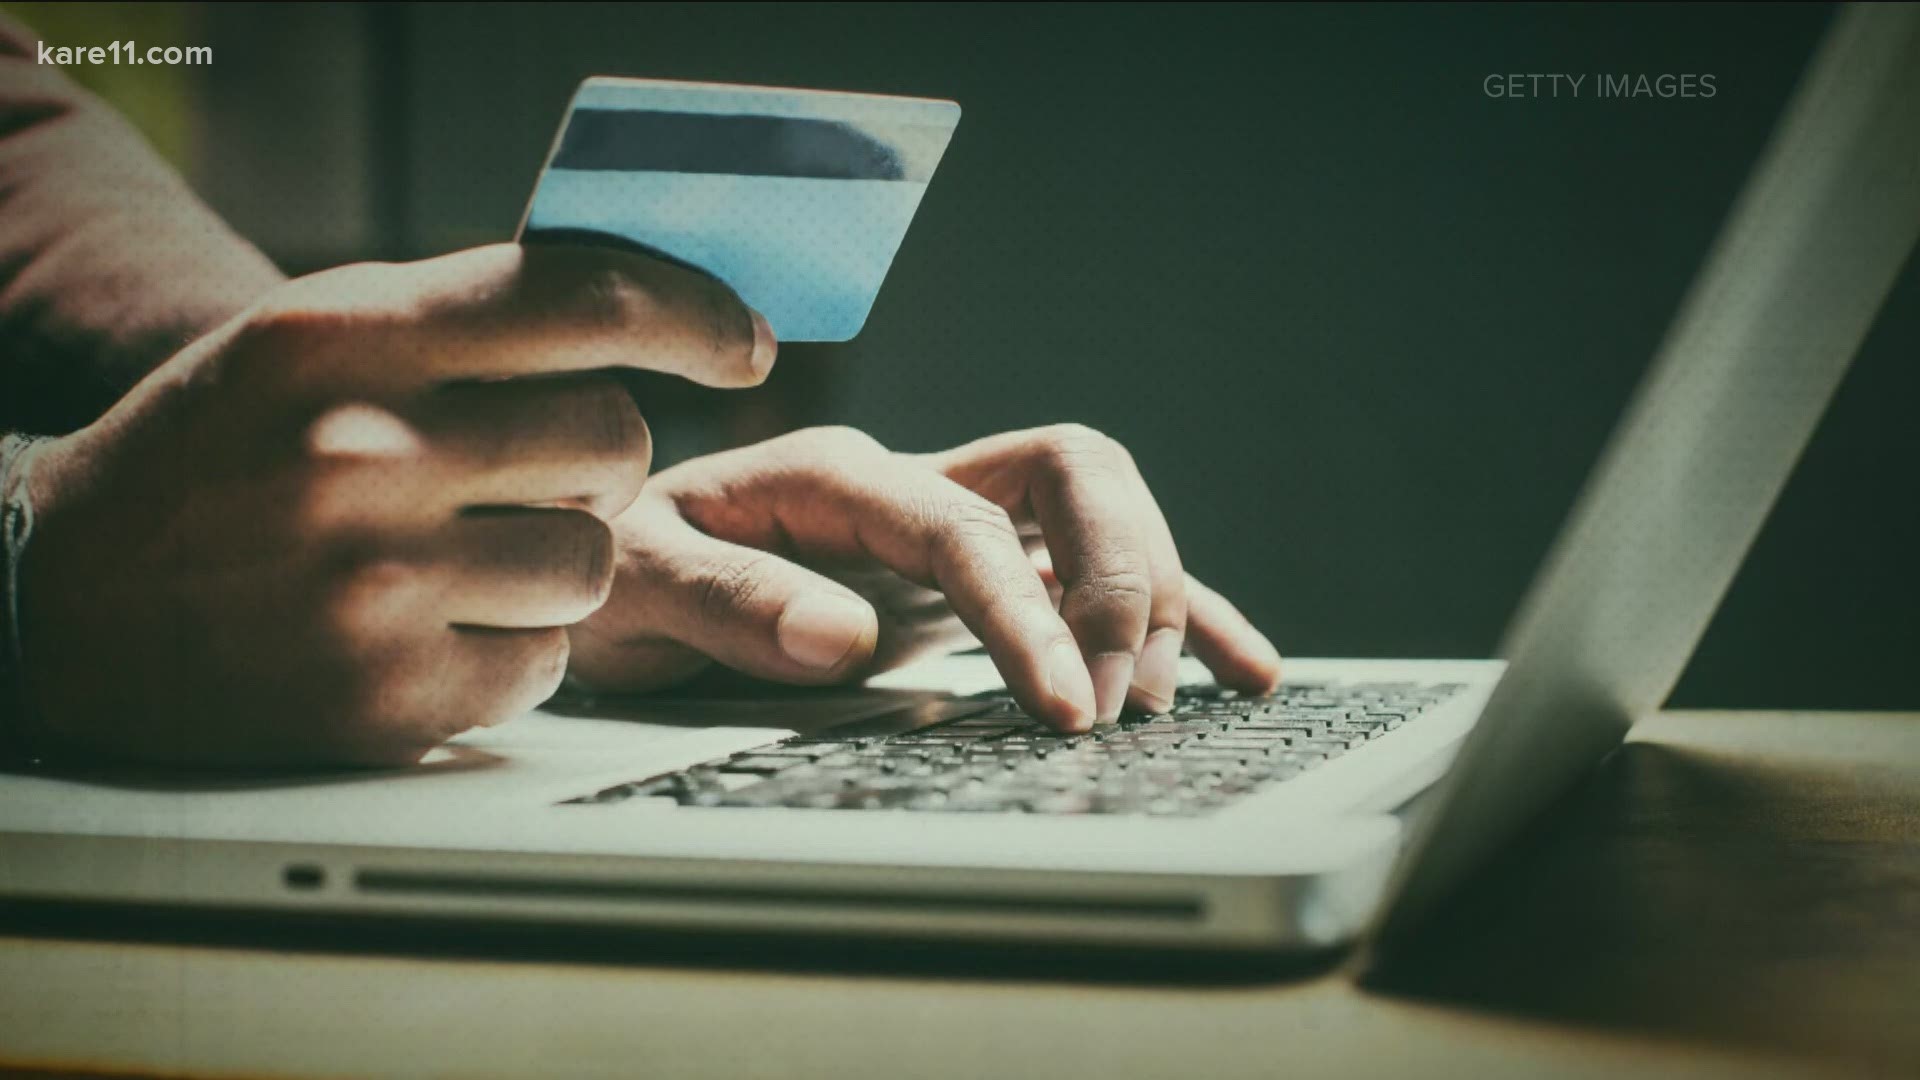 Scammers are using everything from emails to phone calls to rake in big bucks at your expense.